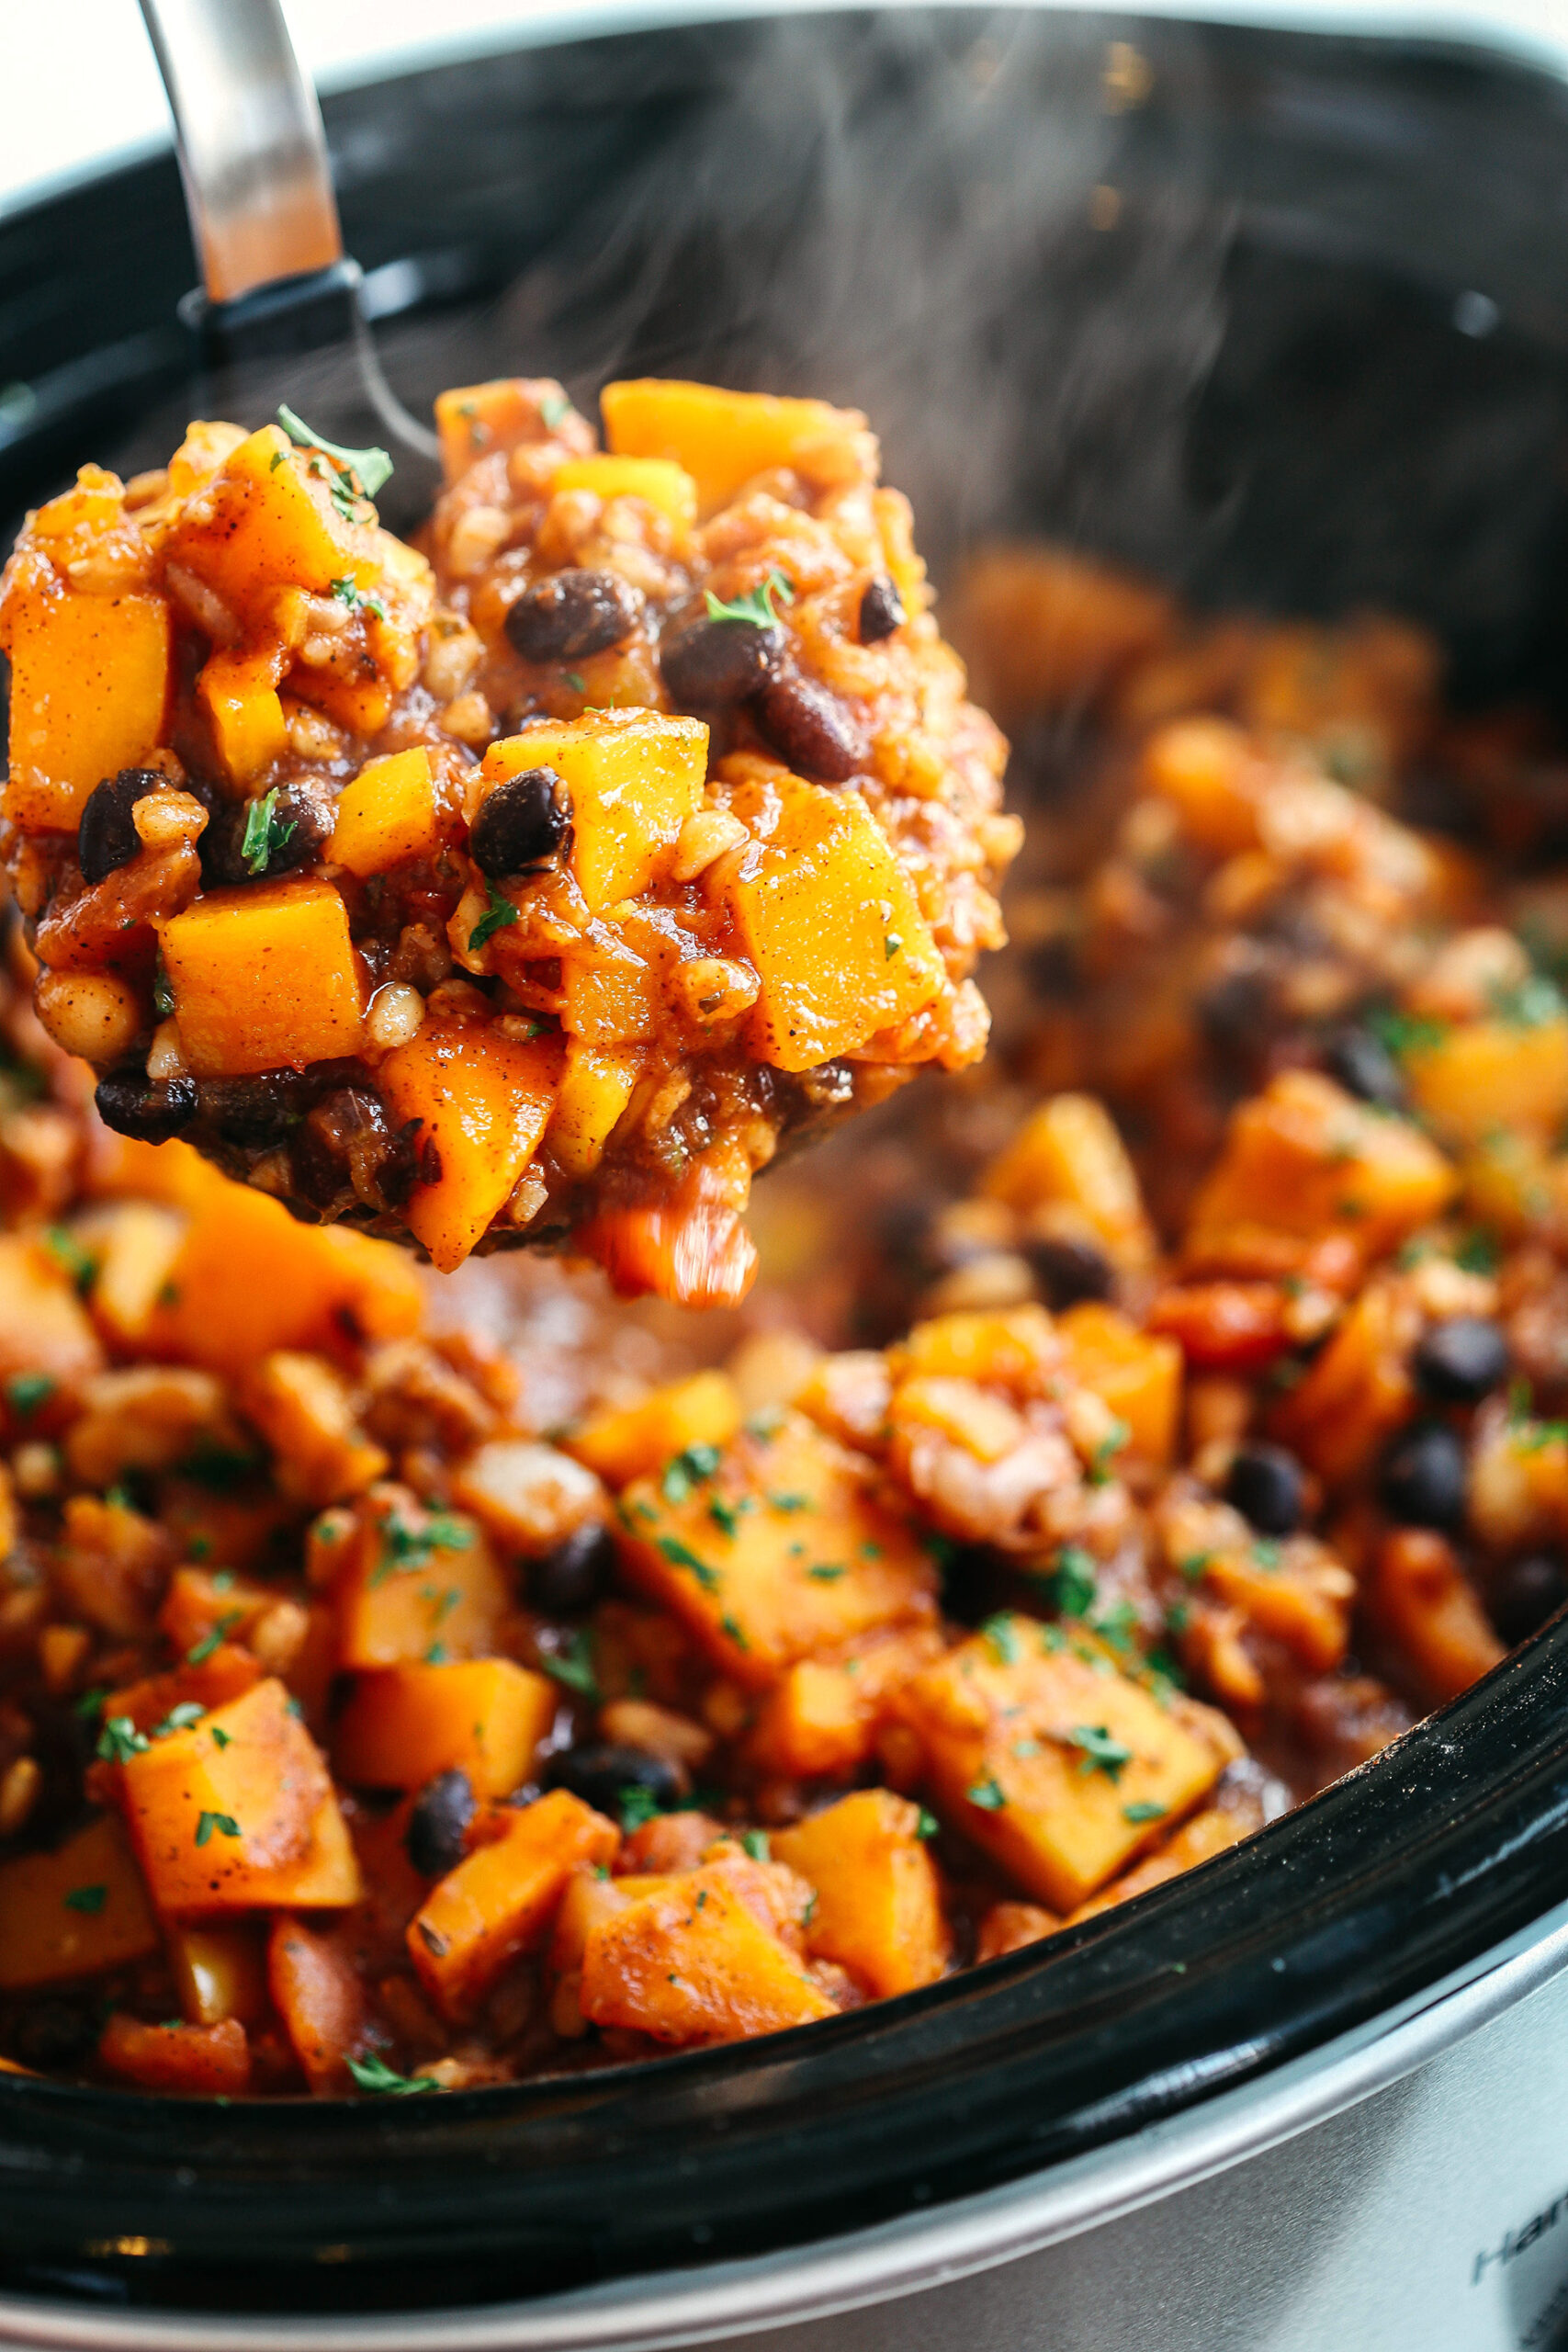 This slow-cooked pumpkin and Farro chili is filling, healthy, and loaded with seasonal vegetables, tender farro, protein-packed beans, and cozy spices, all simmered in a delicious broth for the perfect fall meal!